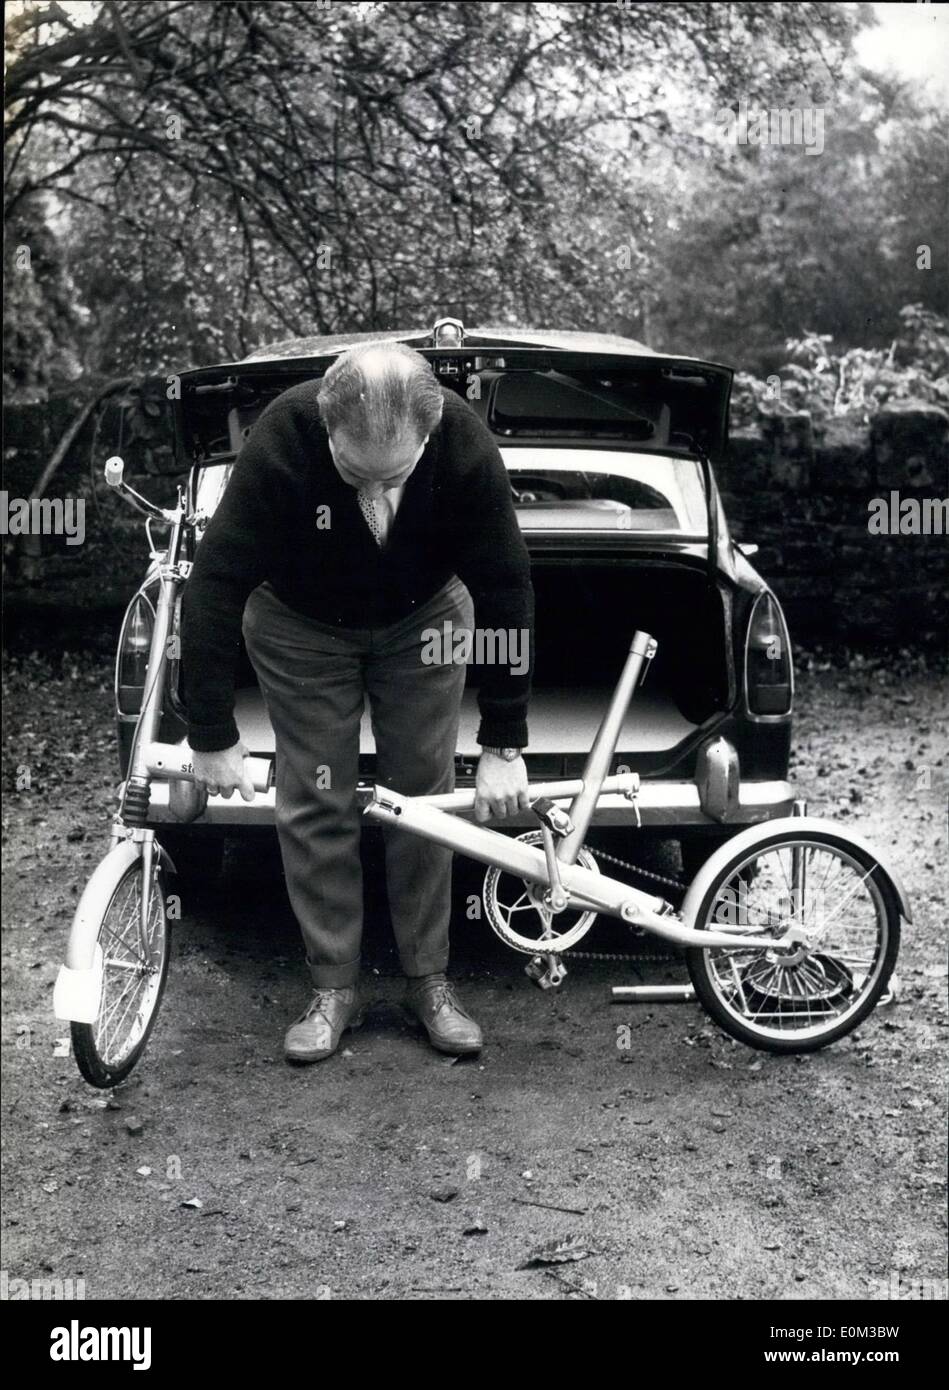 Jun. 06, 1953 - Collapsible bike - which can be stowed in the boot of a car. APRESS.co Stock Photo